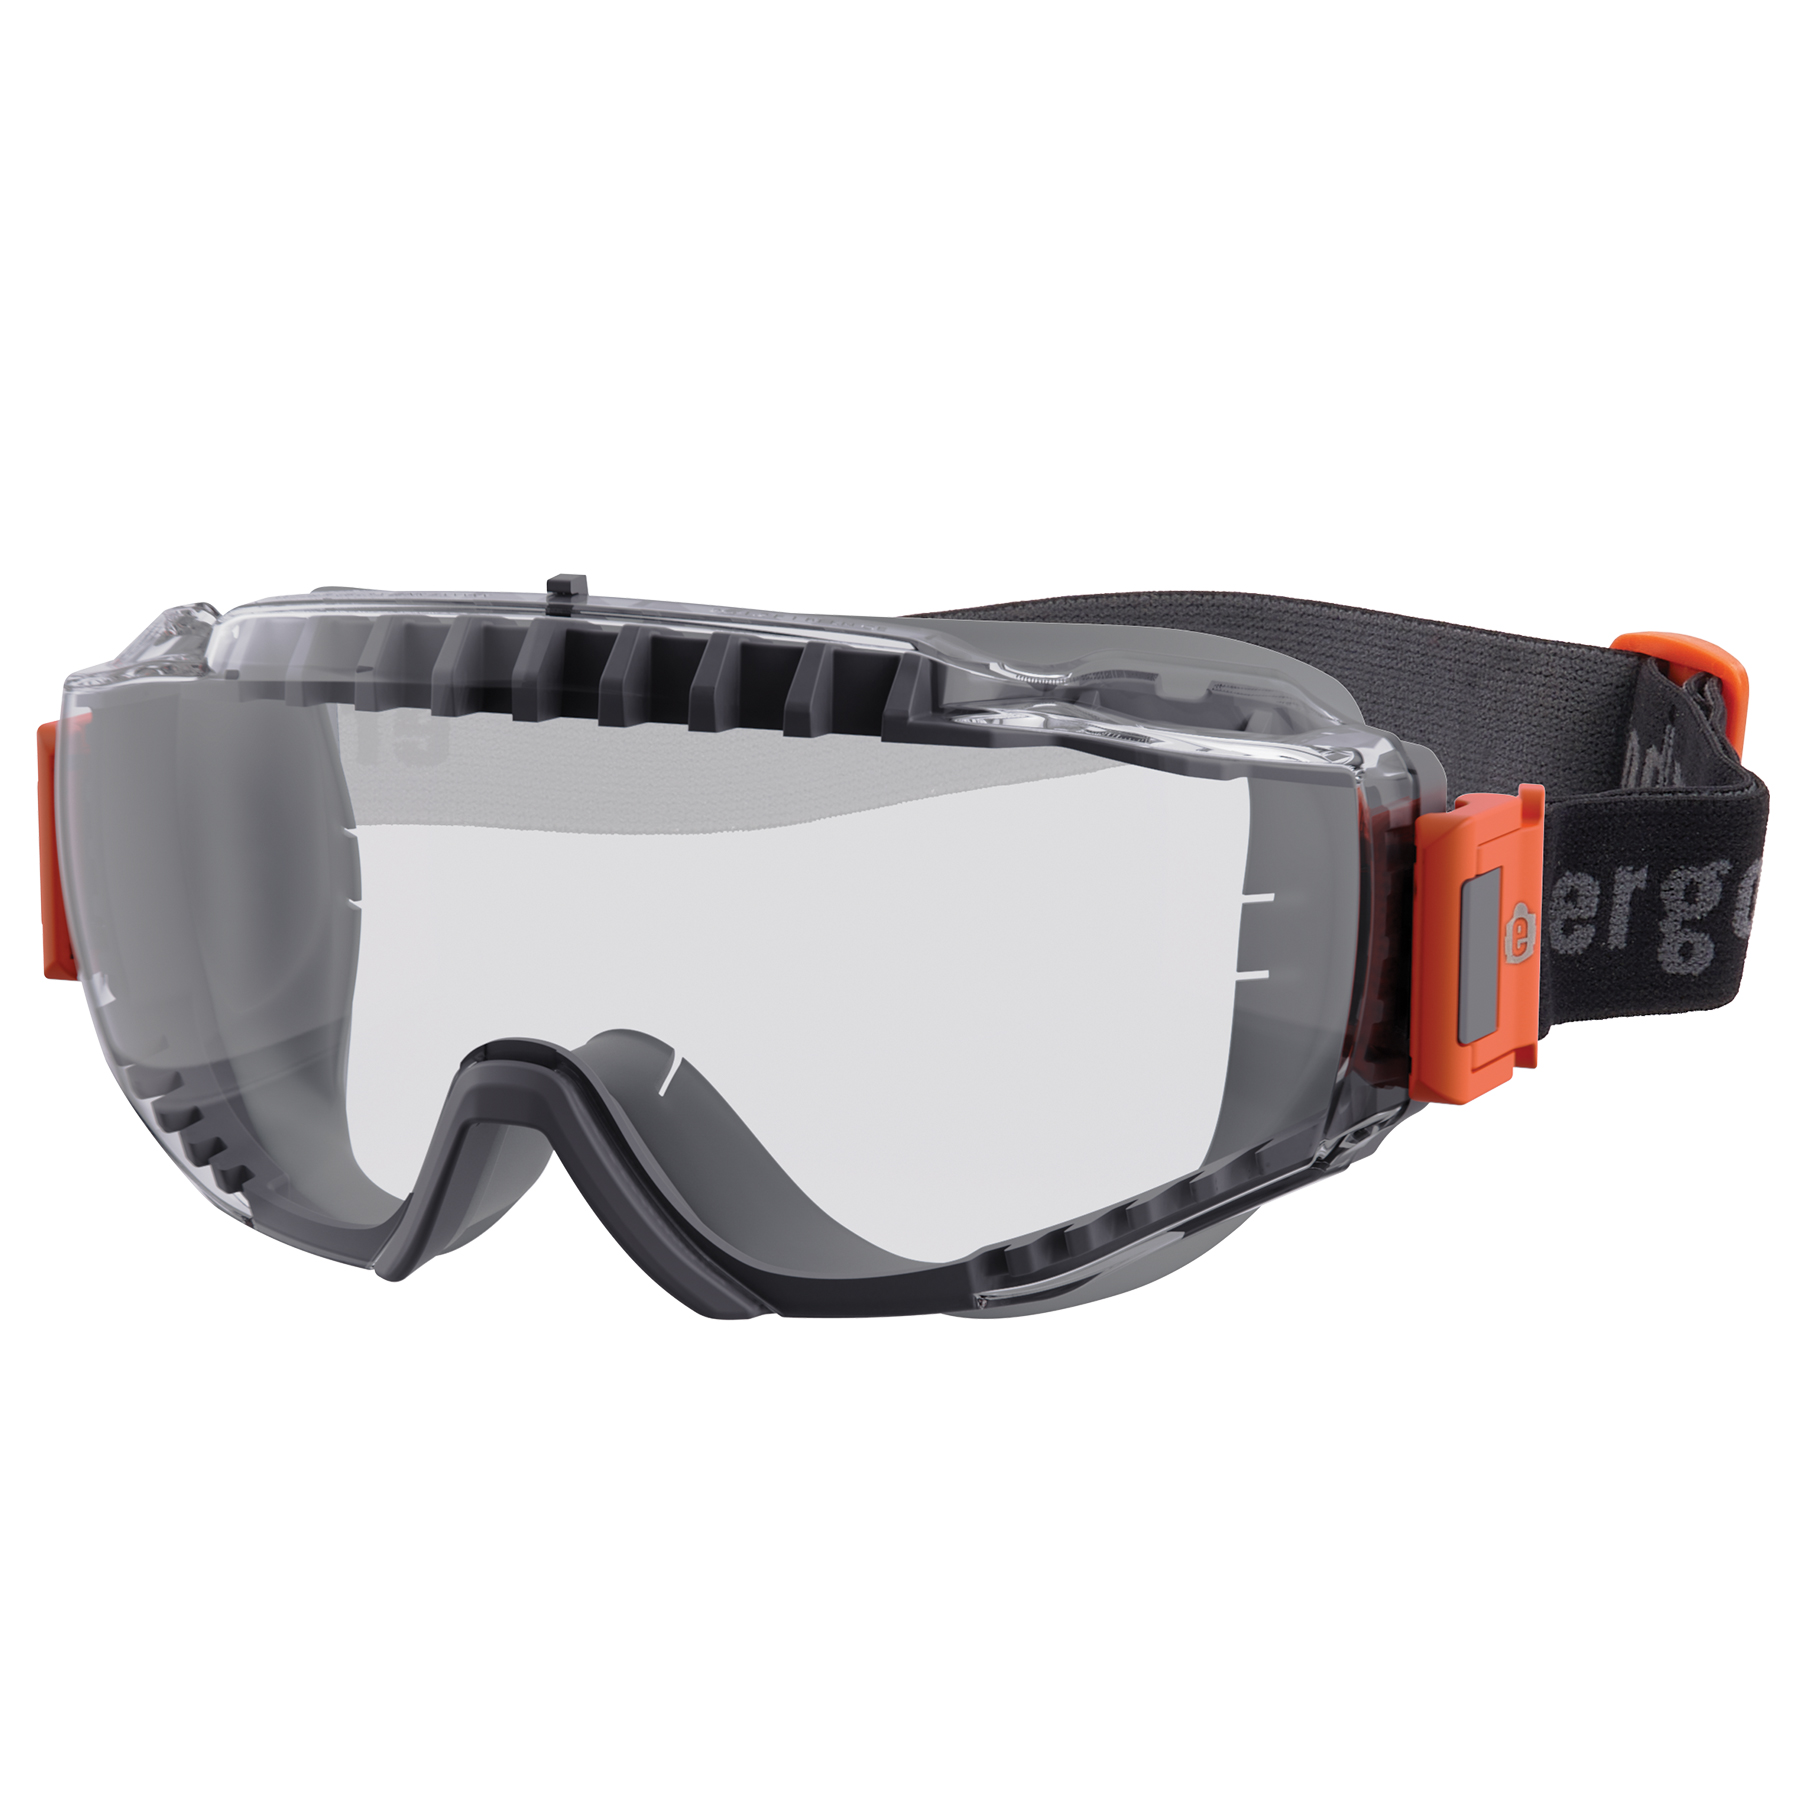 OTG Safety Goggles with Elastic Strap